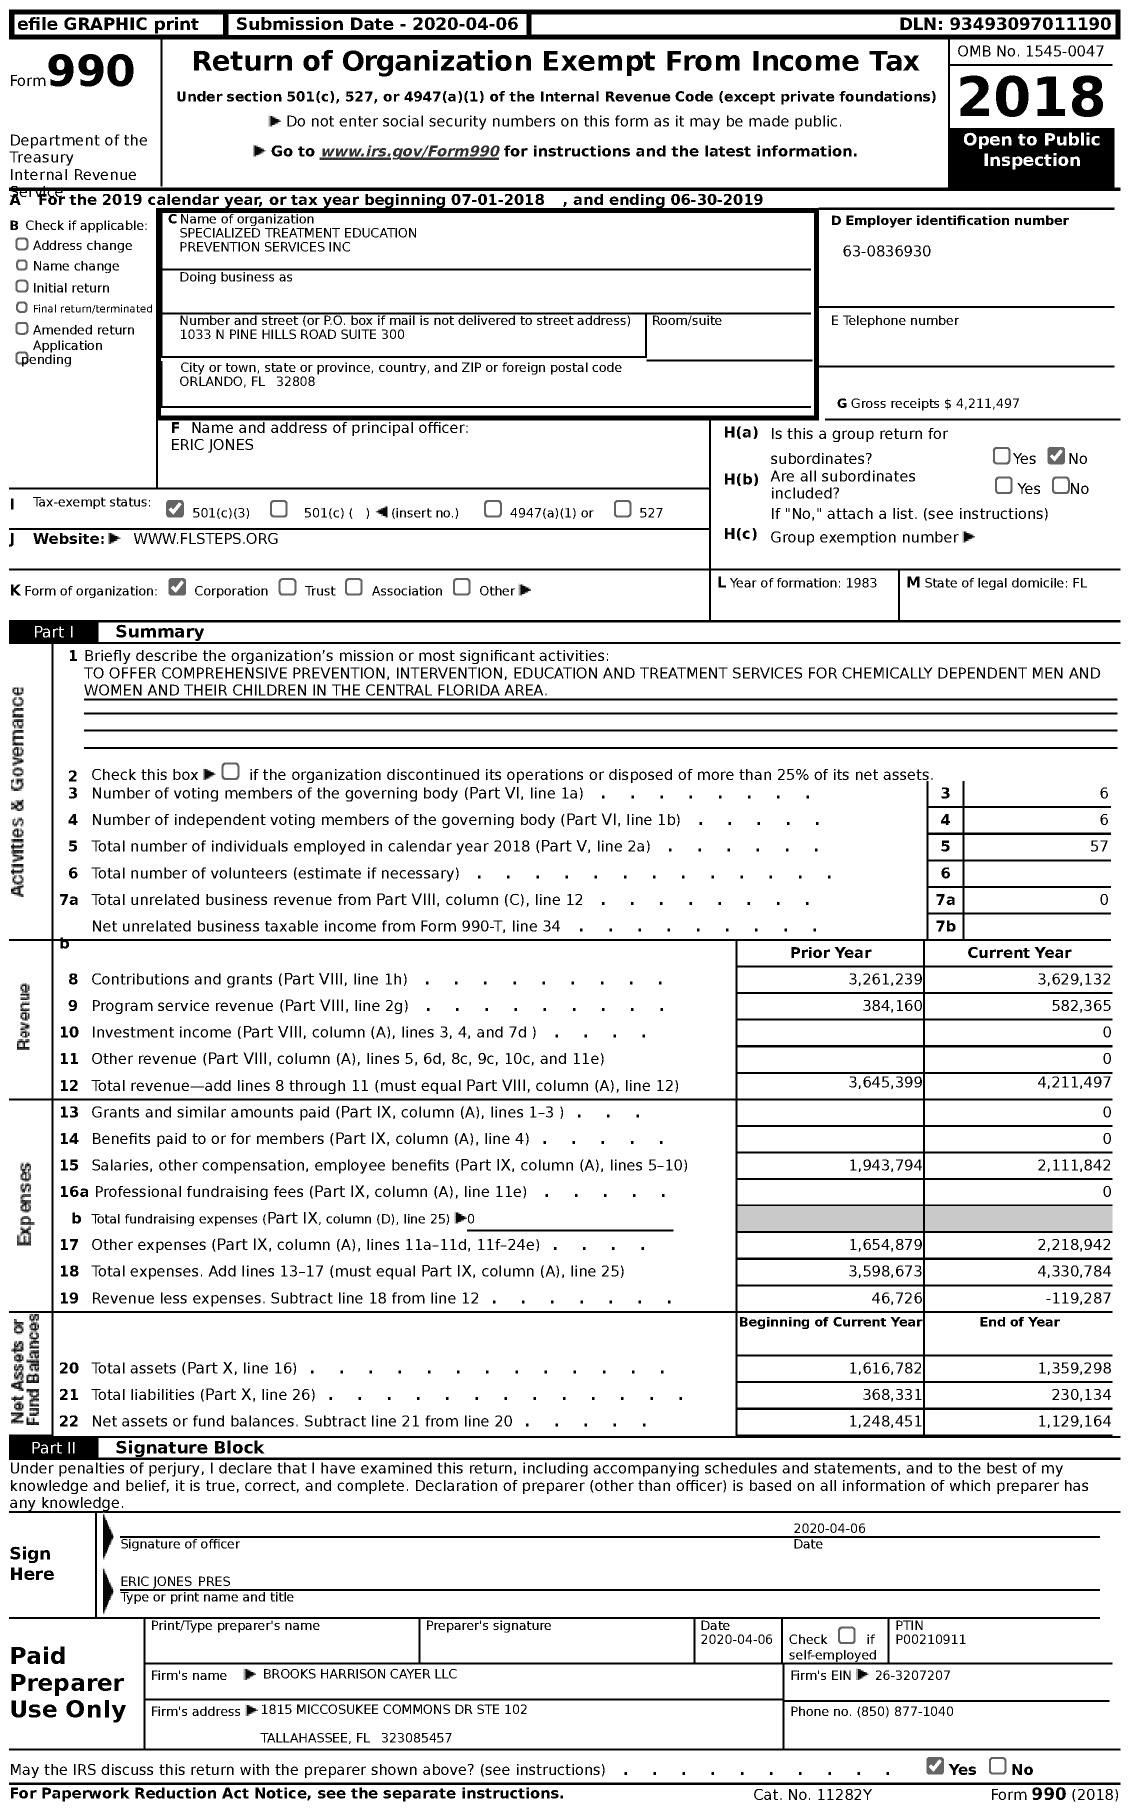 Image of first page of 2018 Form 990 for Specialized Treatment Education Prevention Services (STEPS)